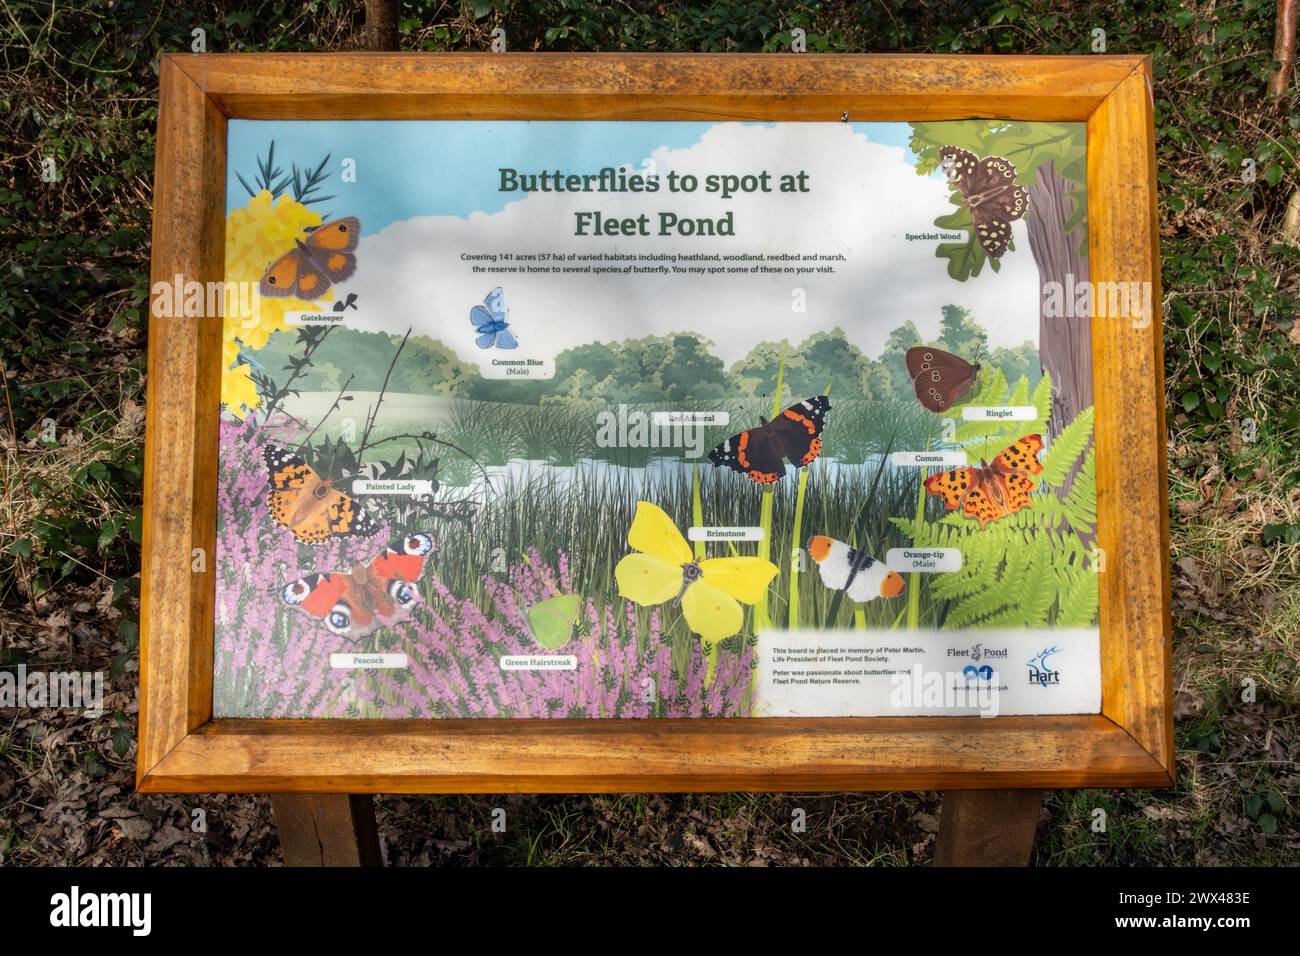 Information board about Butterflies to spot at Fleet Pond, a local nature reserve in Hampshire, England, UK Stock Photo